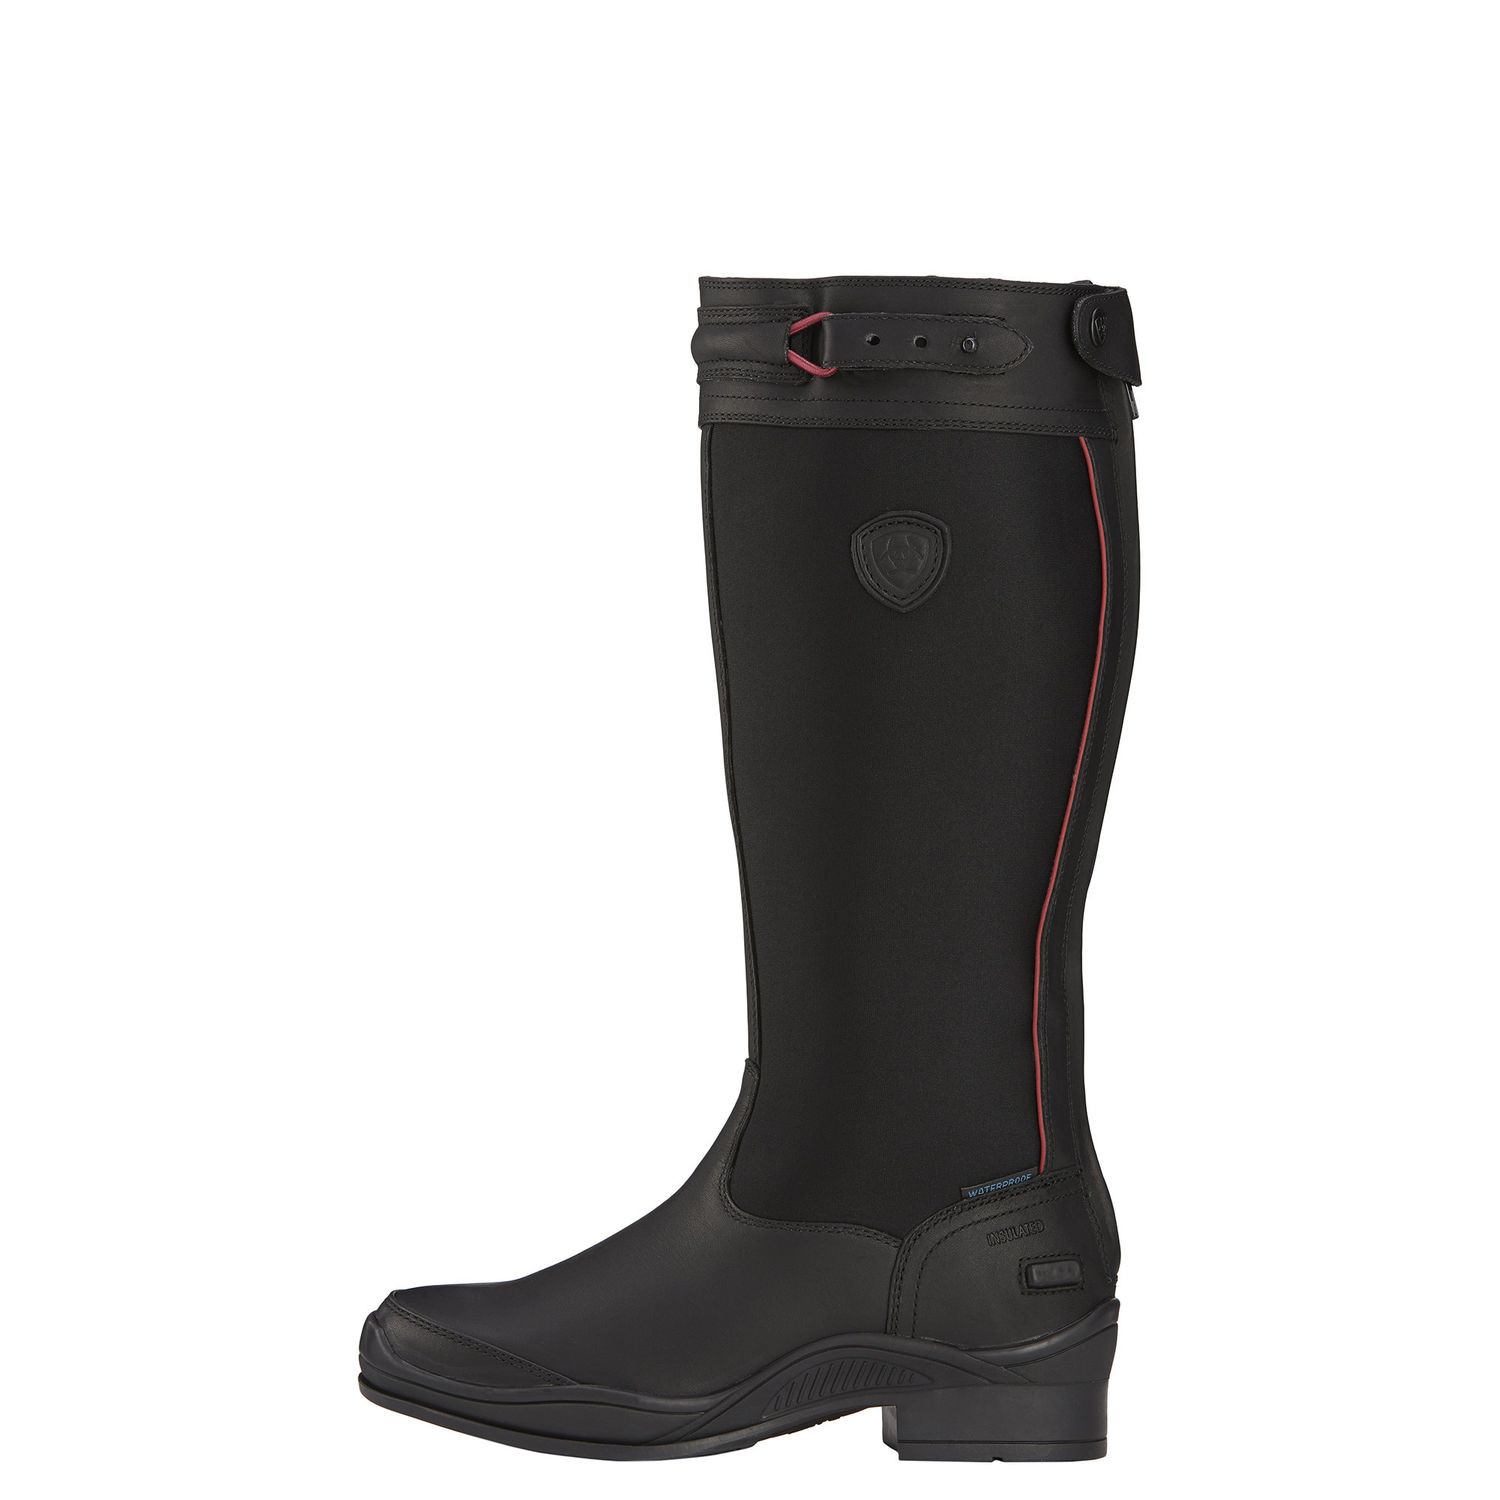 Bottes isolées Extreme Tall H2O